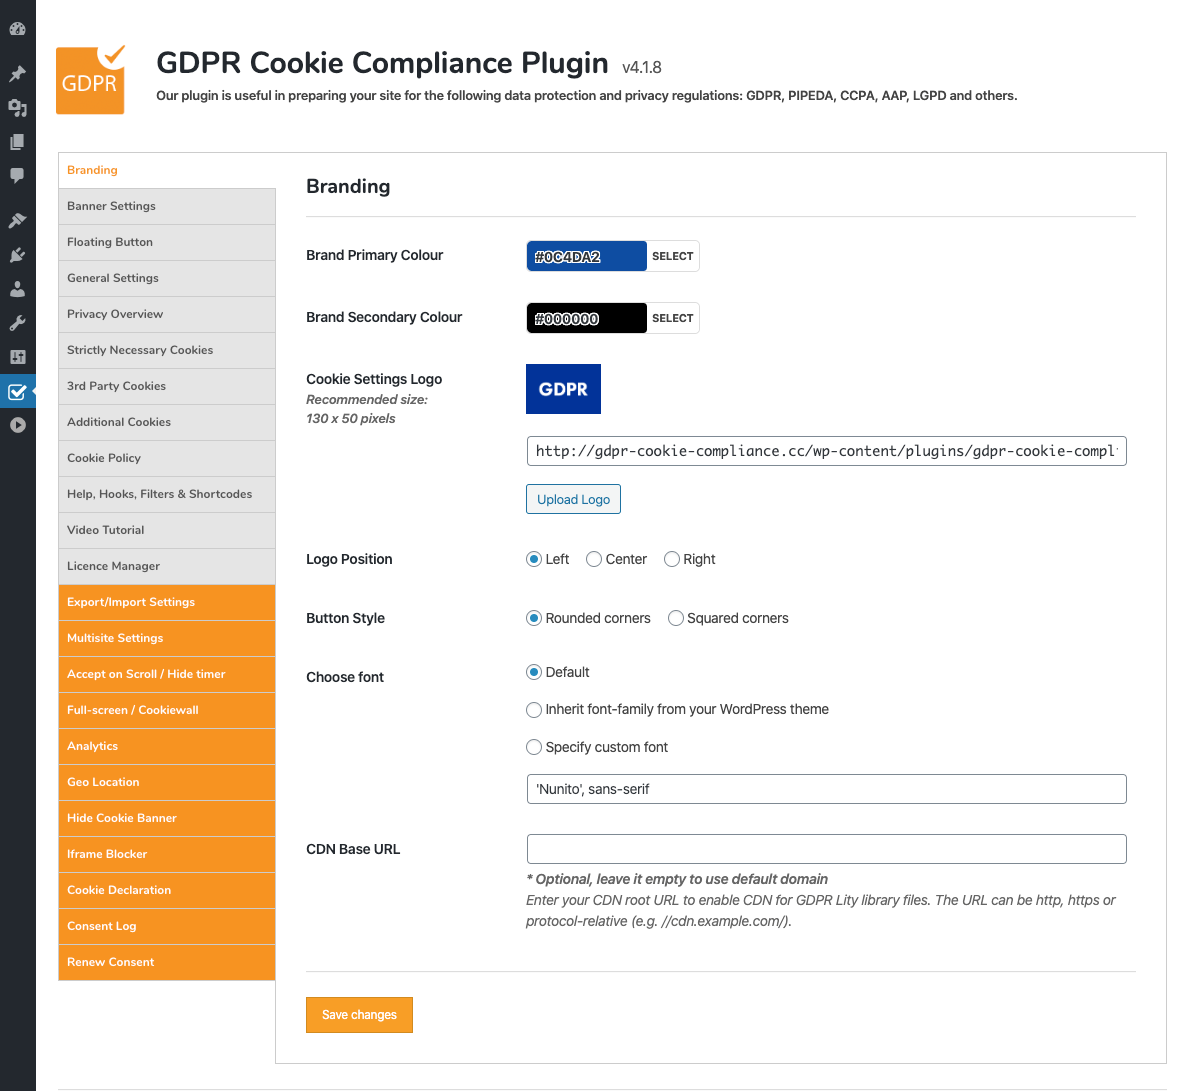 GDPR Cookie Compliance - Front-end - Additional Cookies